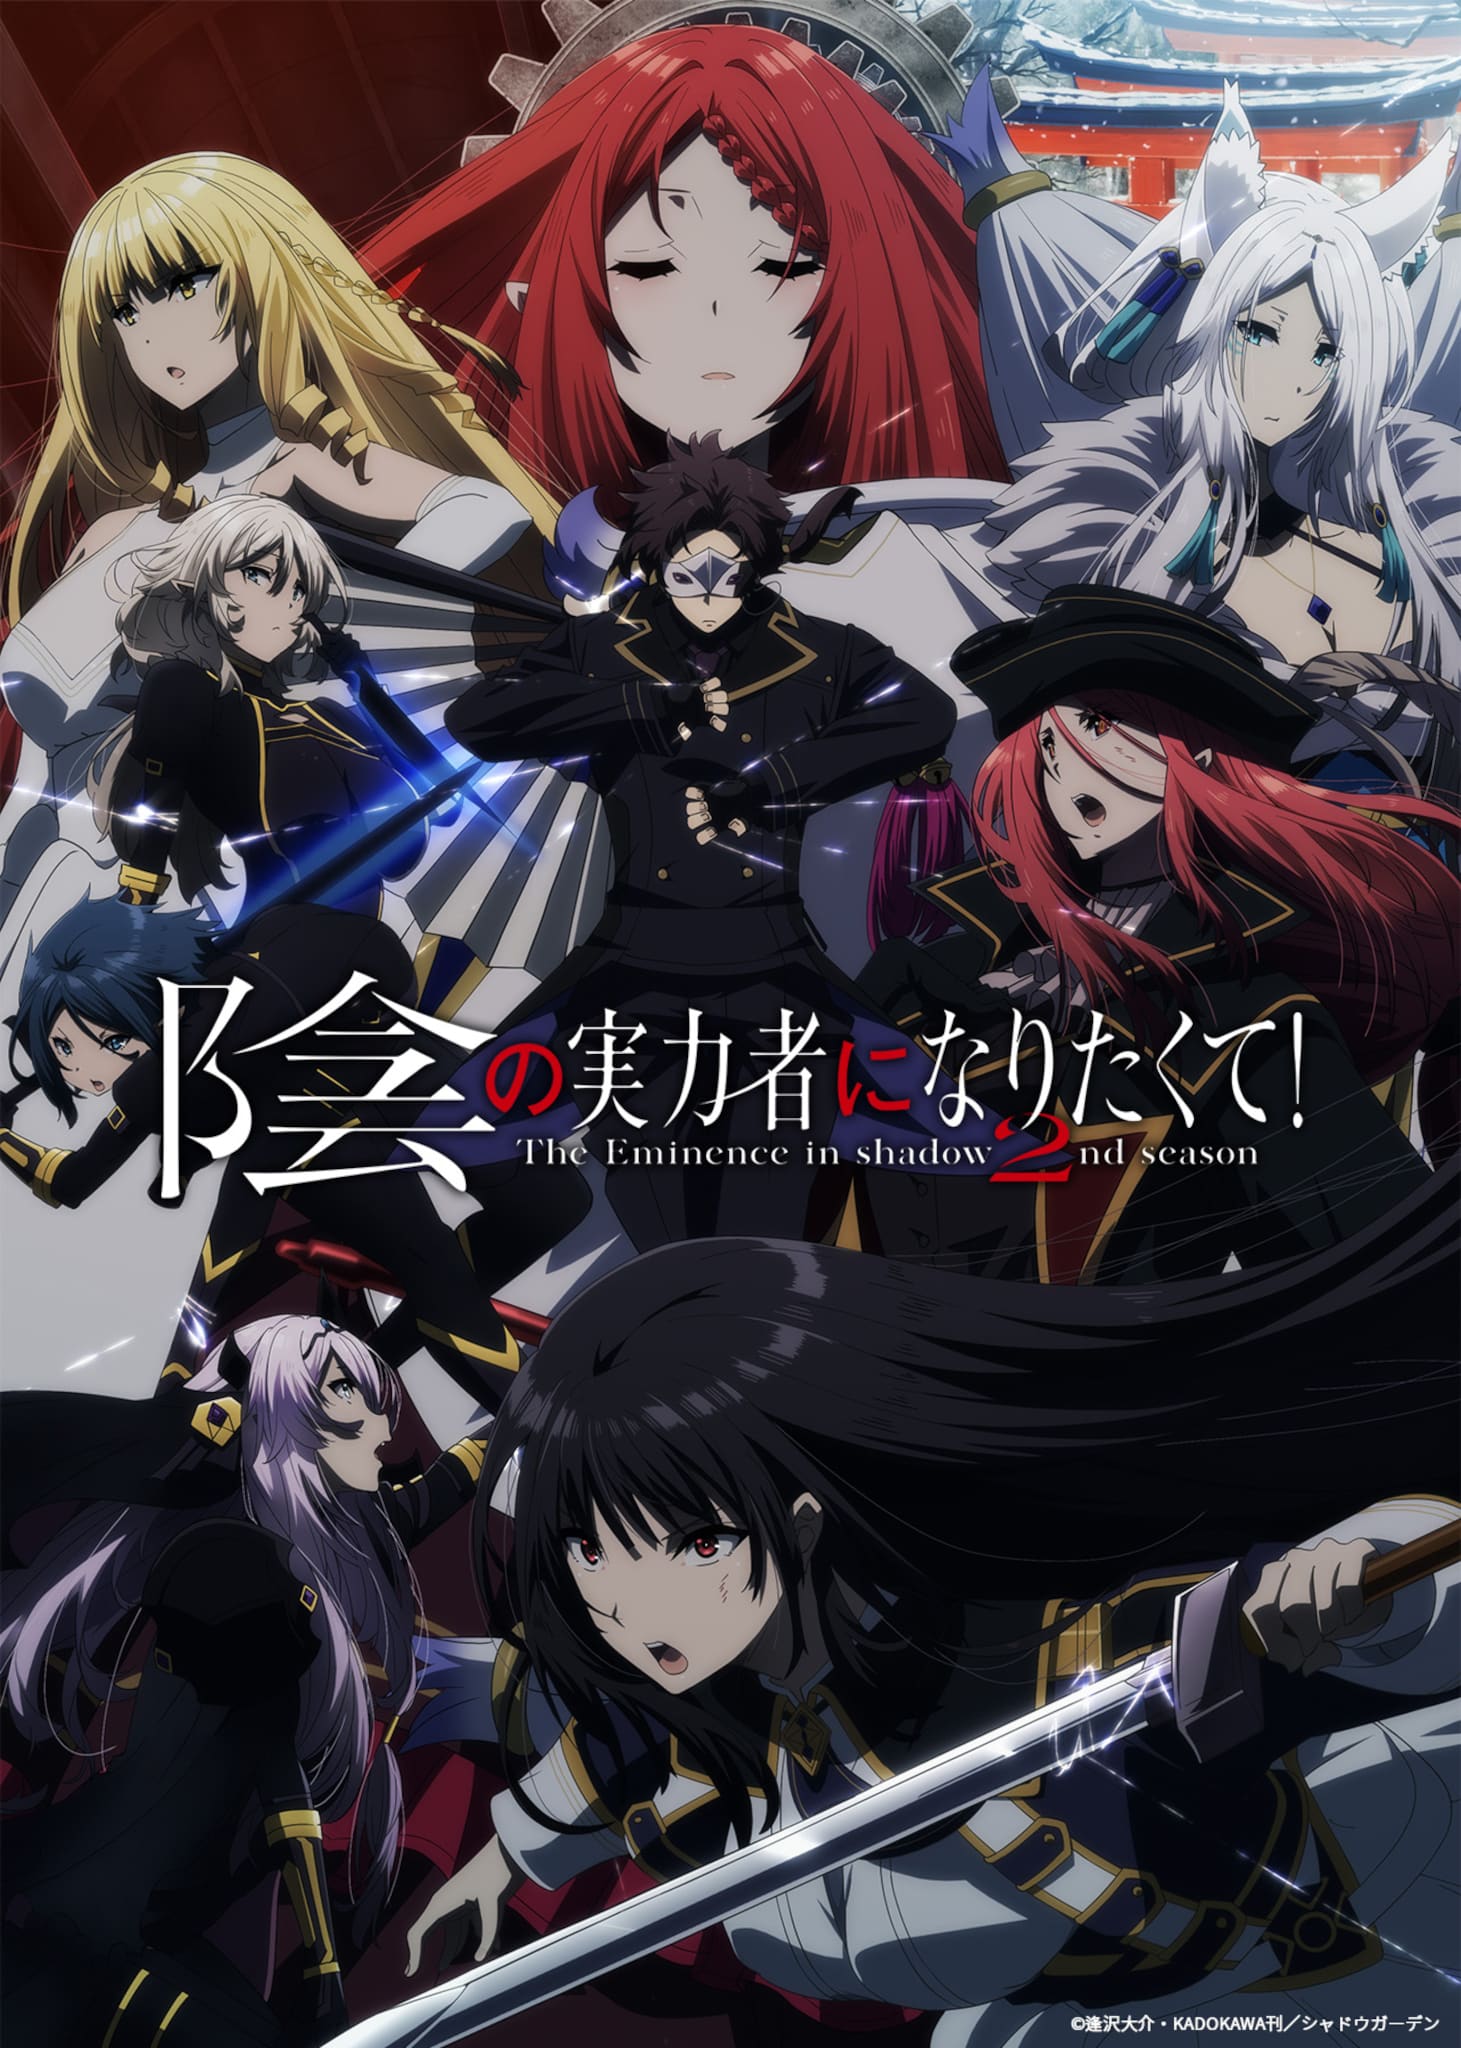 The Eminence in Shadow - Anime en streaming GRATUIT, VOSTFR & VF, HD